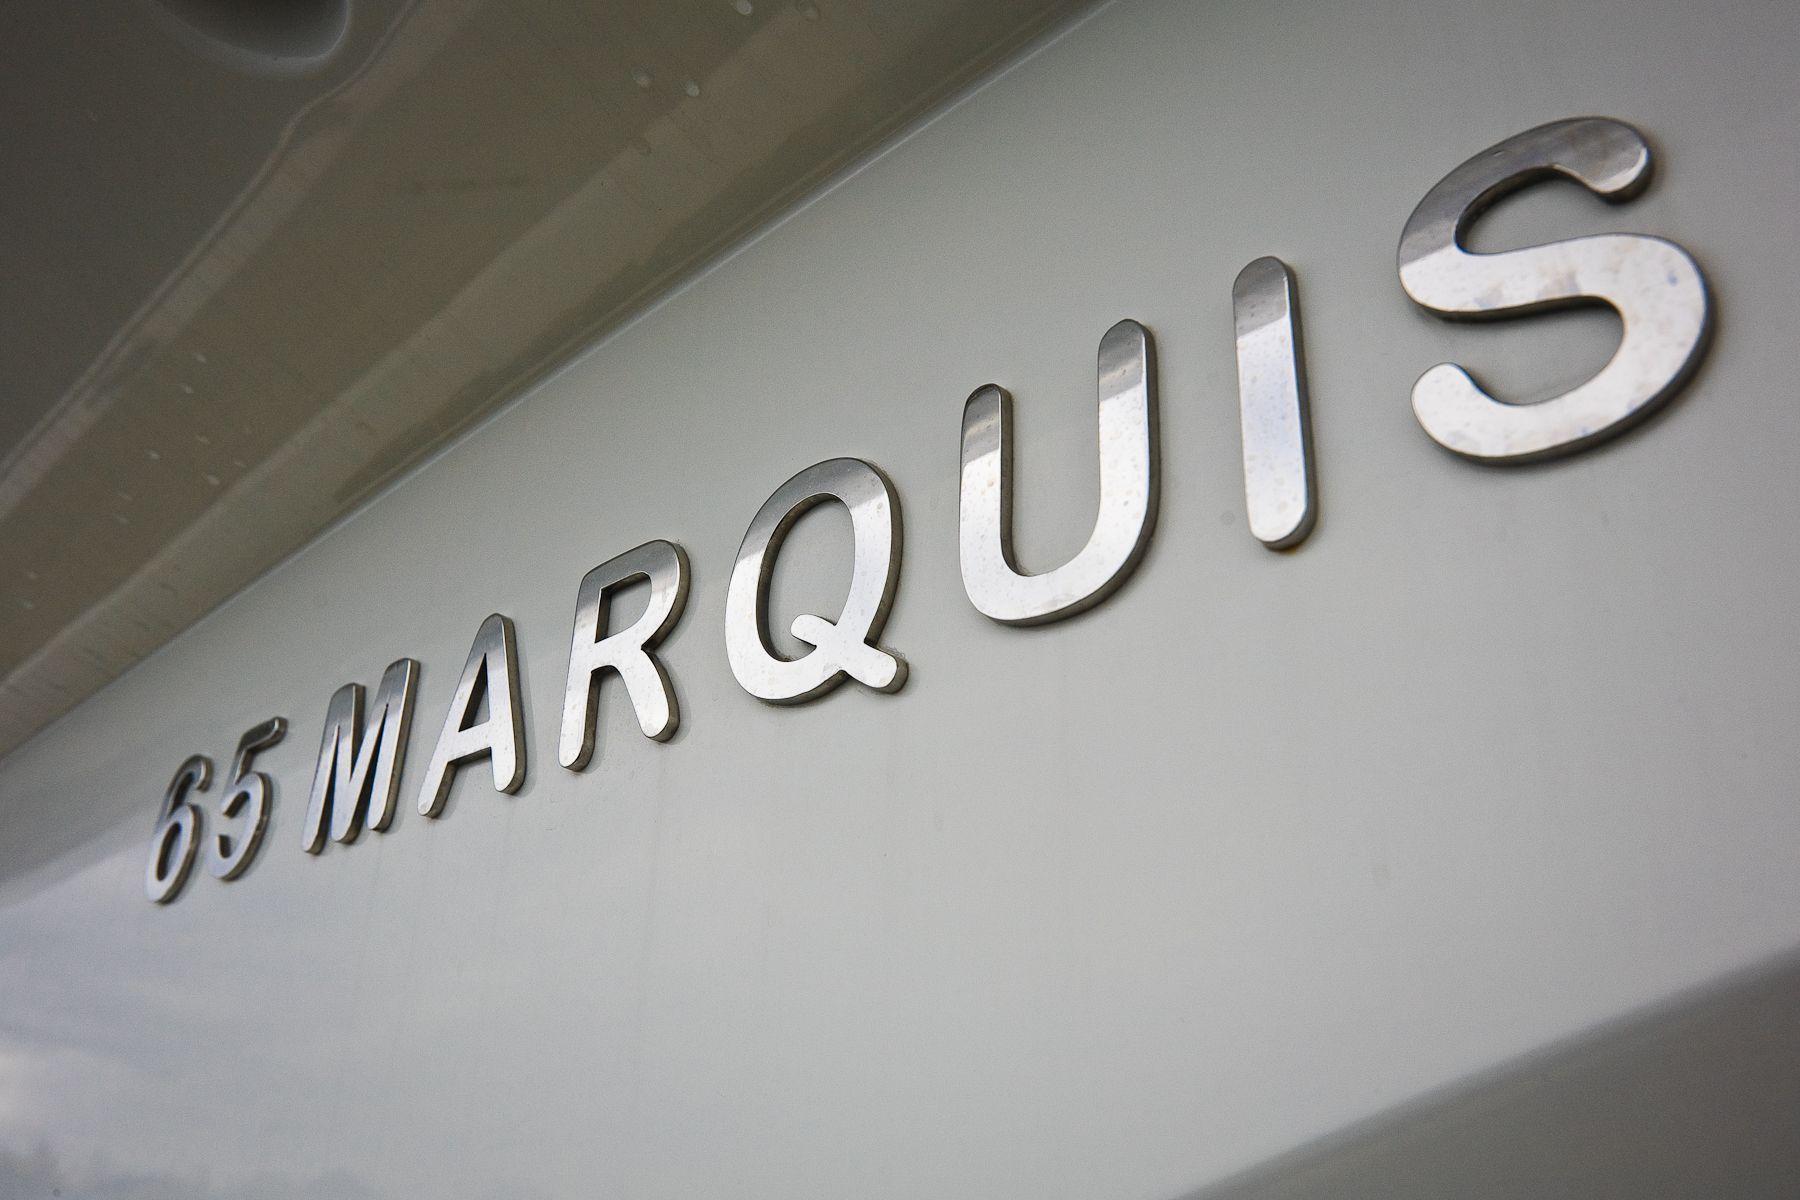 Marquis 65 Motor Yacht, Seattle